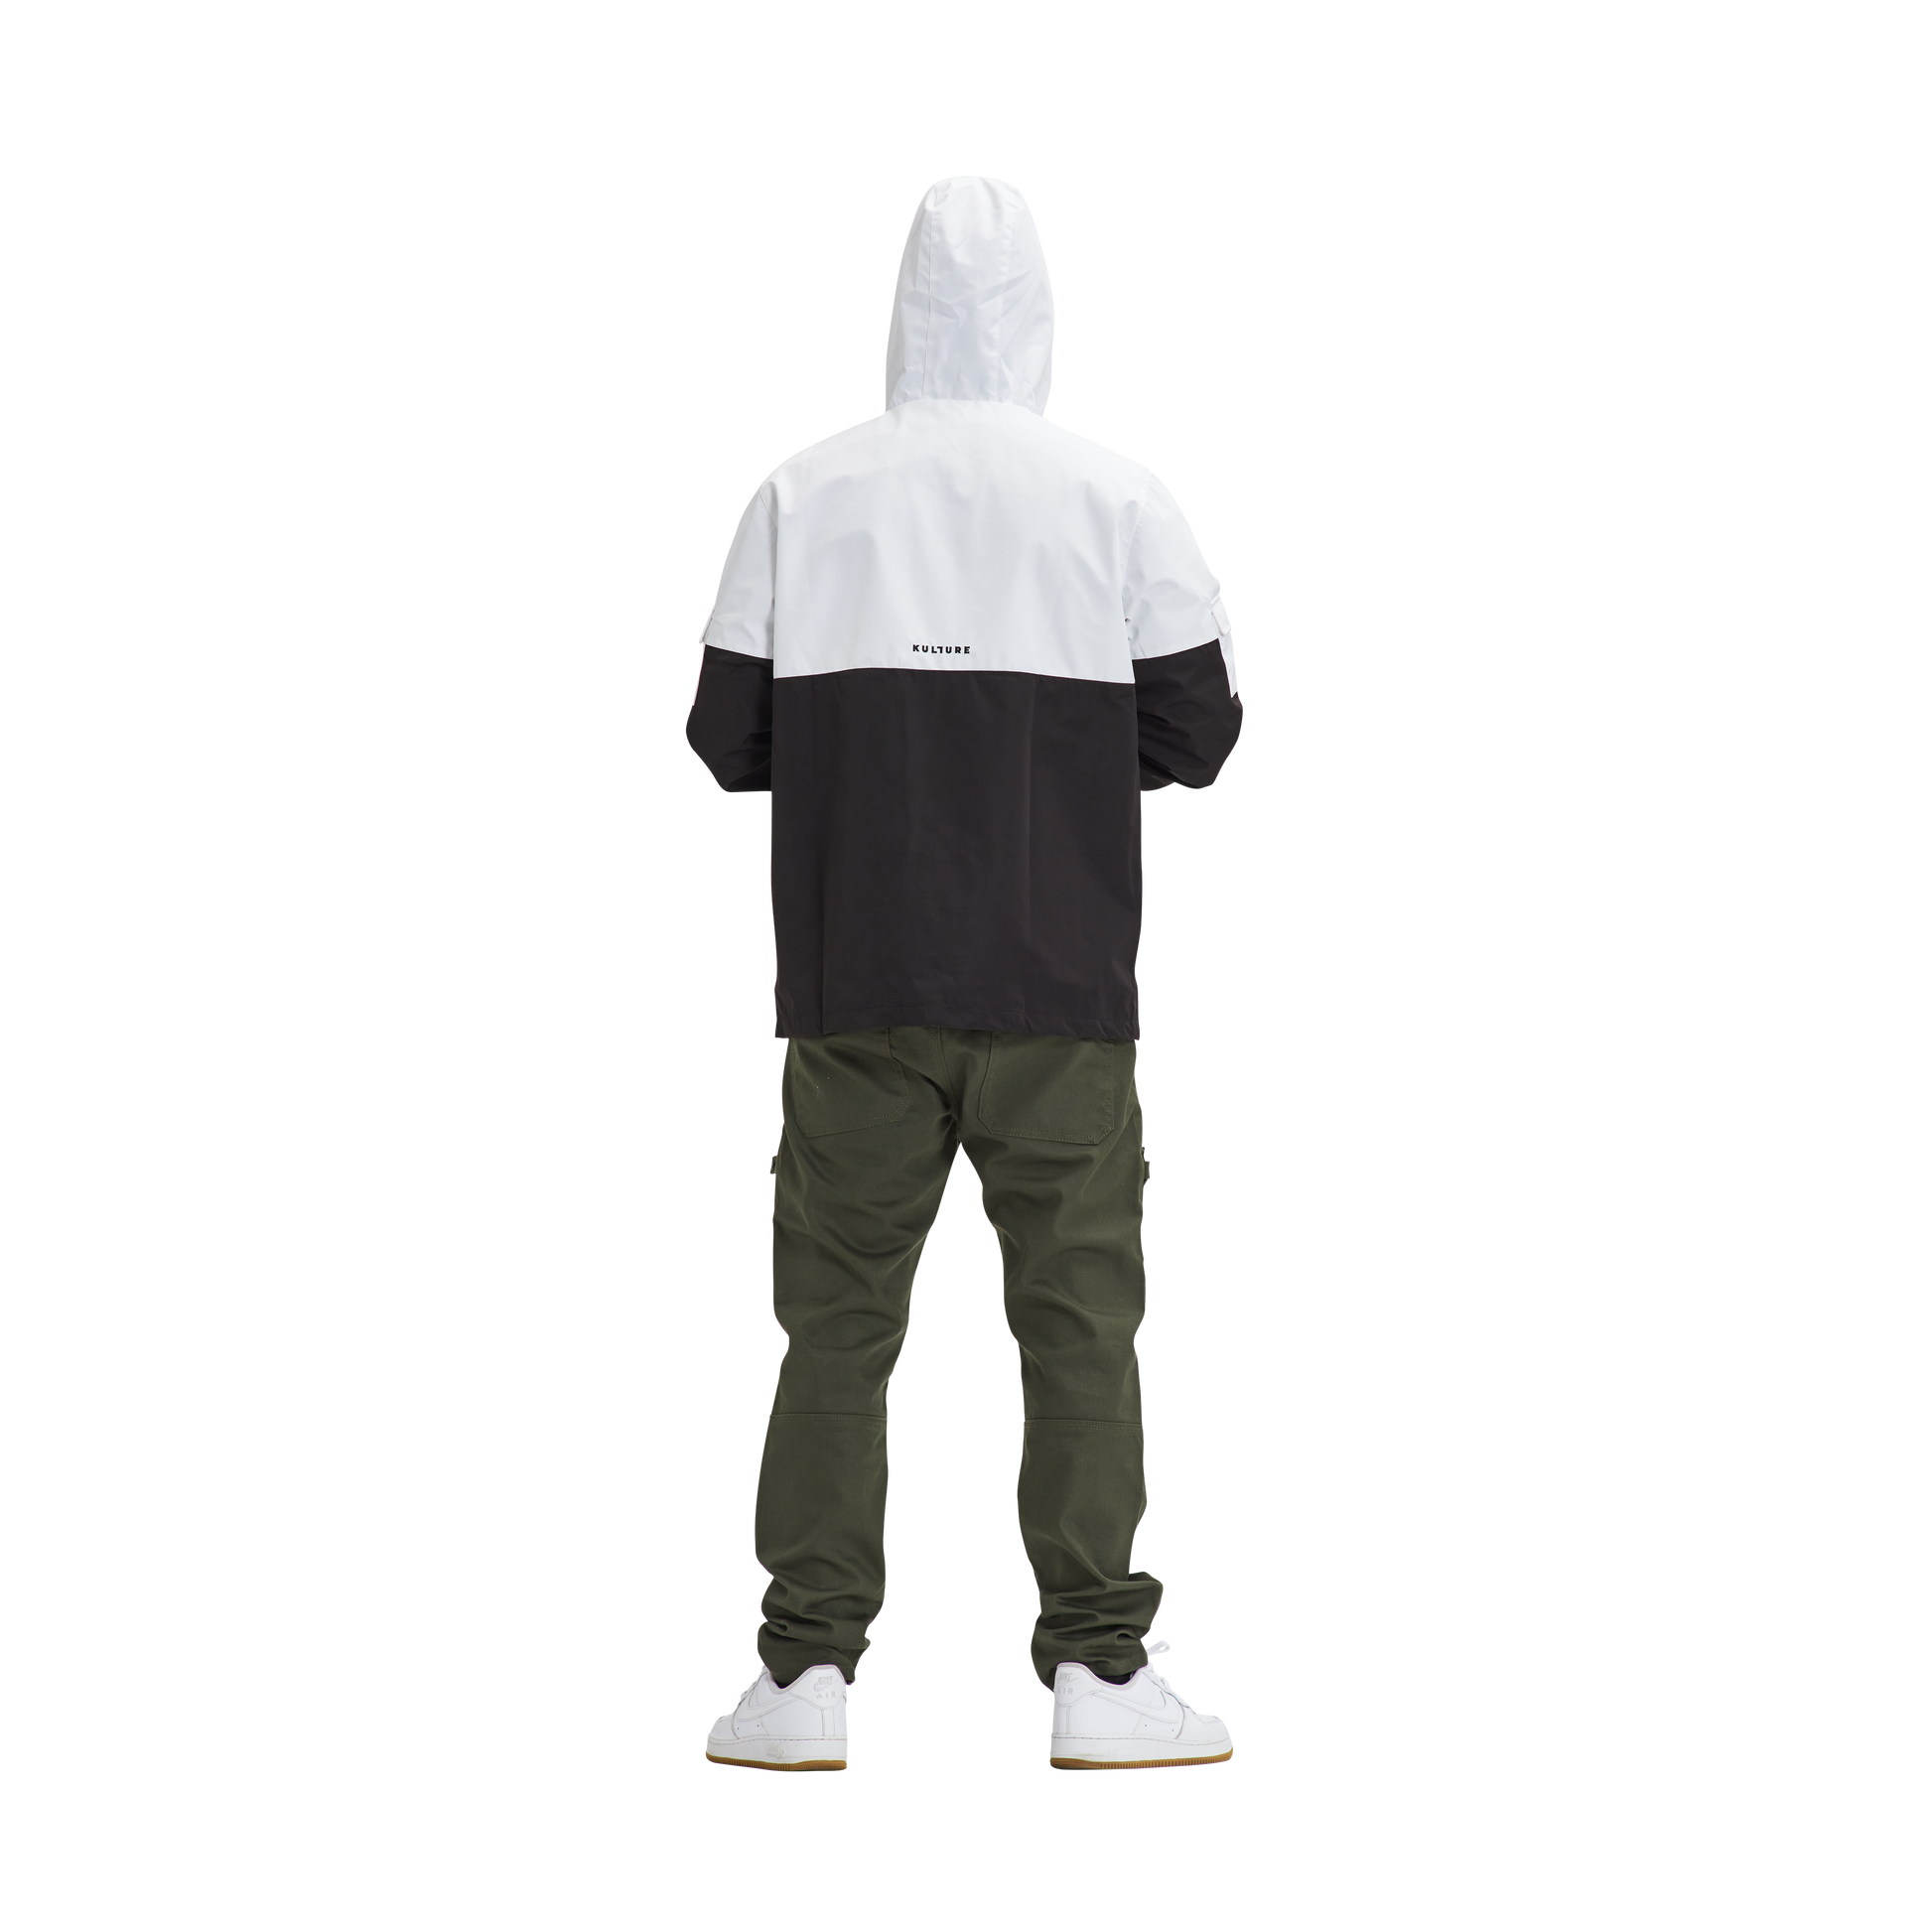 A man wearing a Kulture LAX V1 Hooded Anorak jacket in white and black and green pants.